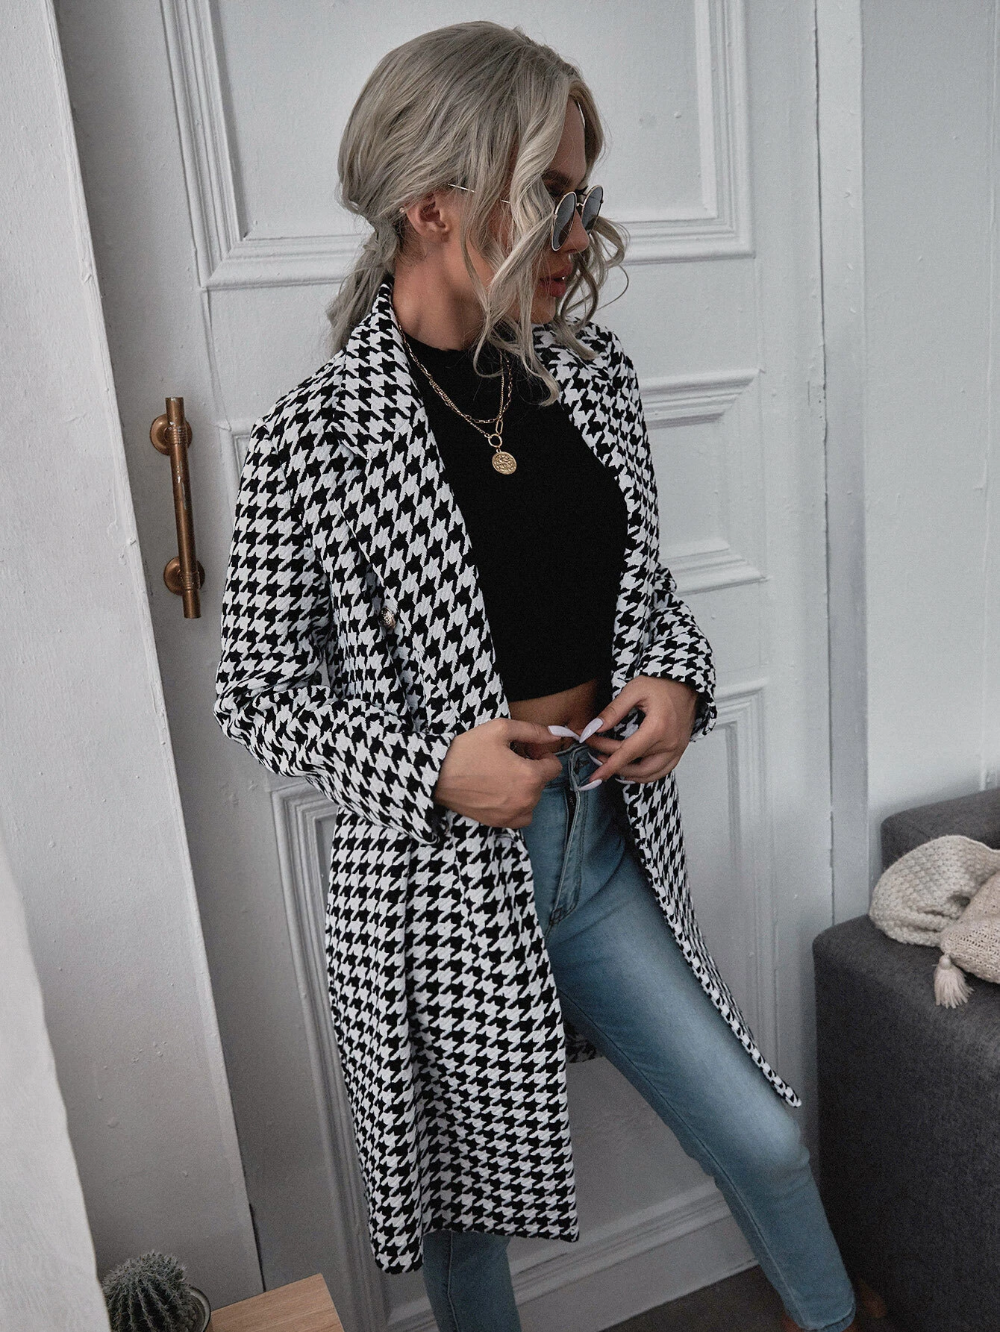 https://flyfiercefab.com/wp-content/uploads/2020/10/SHEin-Lapel-Collar-Double-Breasted-Houndstooth-Coat.png